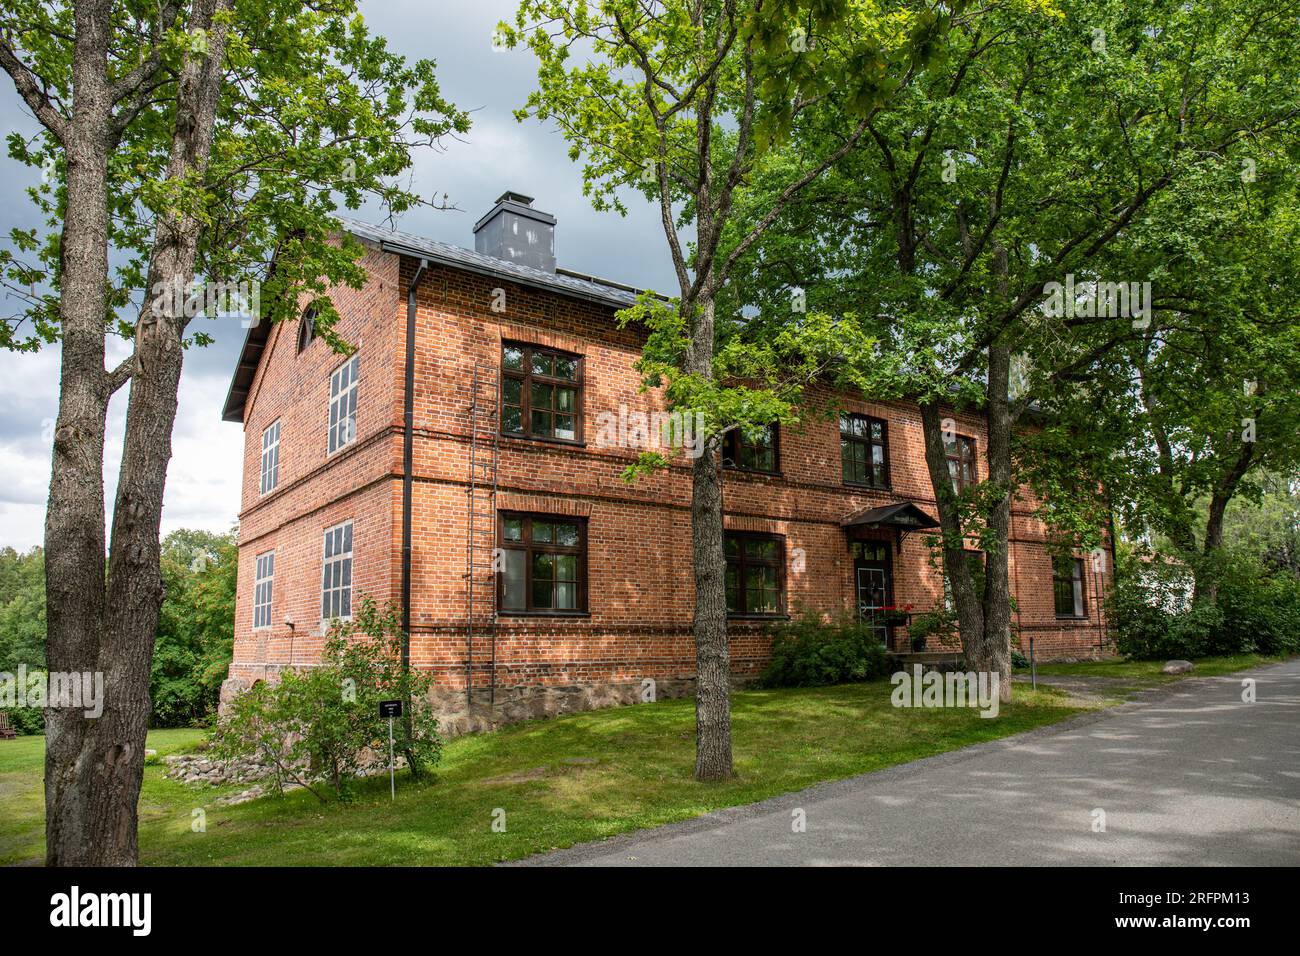 Anttipoffi, a red brick residential building, built in 1852, originally for worker's housing, in Mathildedal village in Perniö, Finland Stock Photo